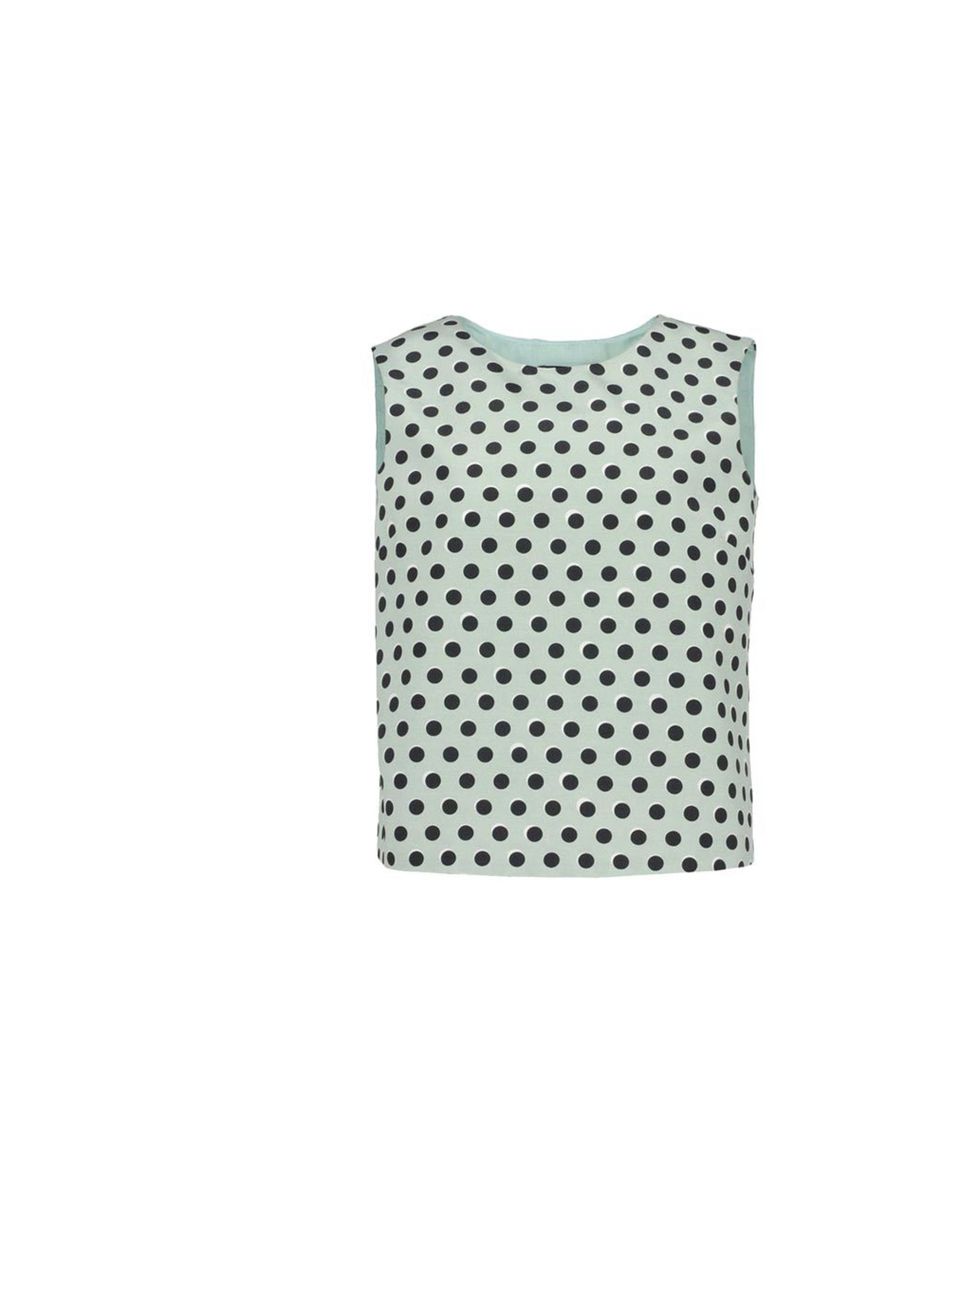 <p>Rochas polka dot cropped top, £370, at <a href="http://www.thecorner.com/gb/women/top_cod37444245sj.html">www.thecorner.com</a></p>